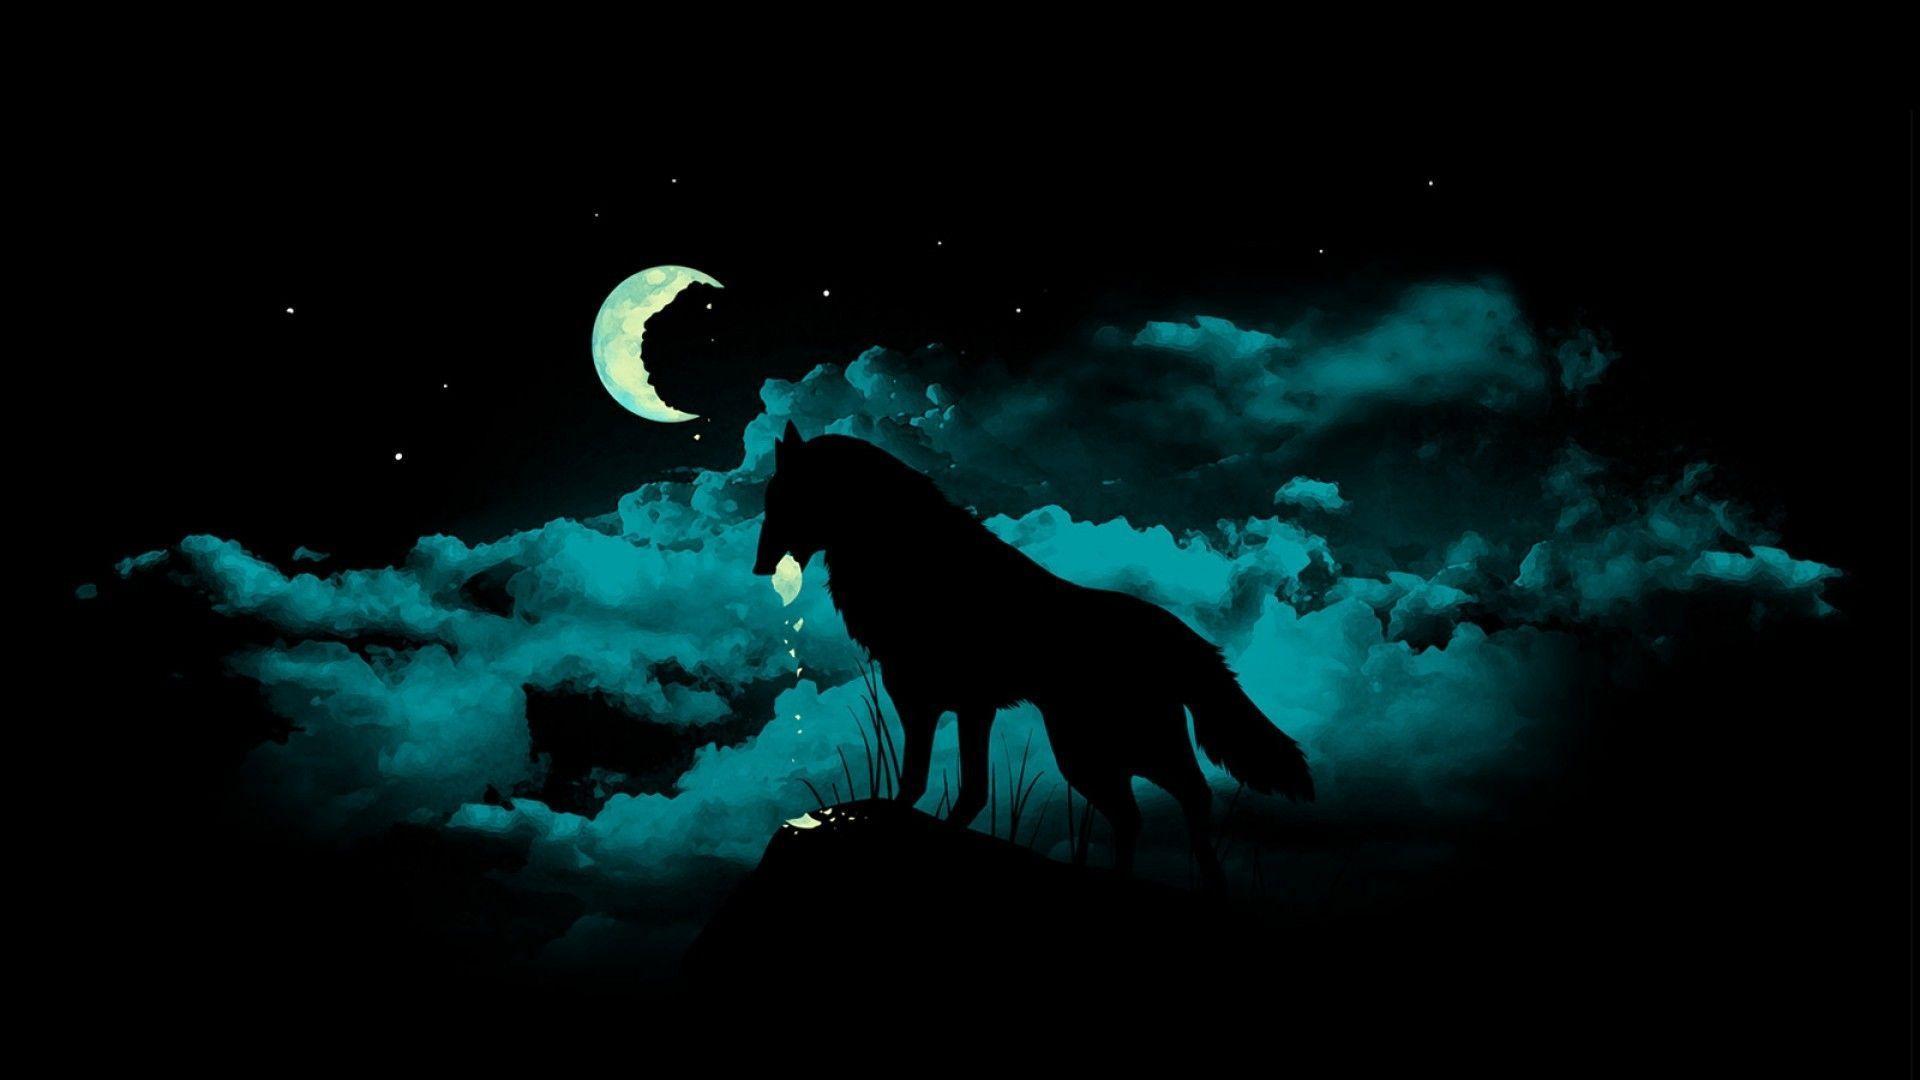 Wolf Laptop Wallpapers